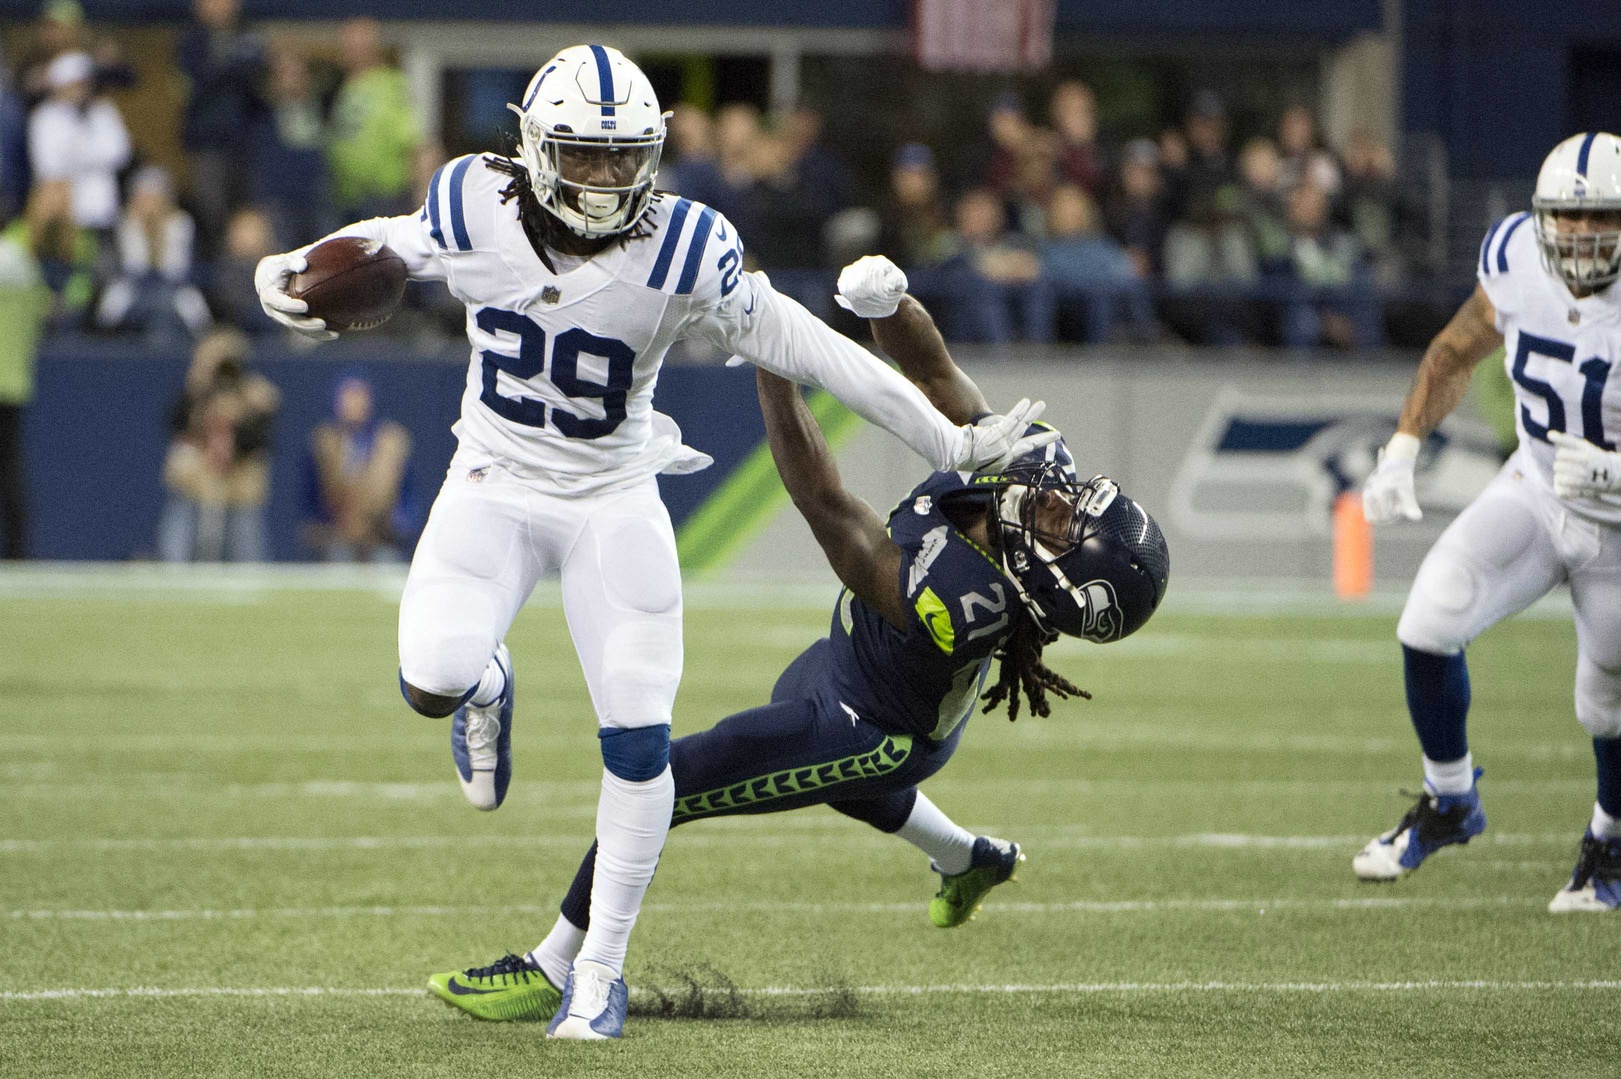 Indianapolis Colts rookie safety Malik Hooker